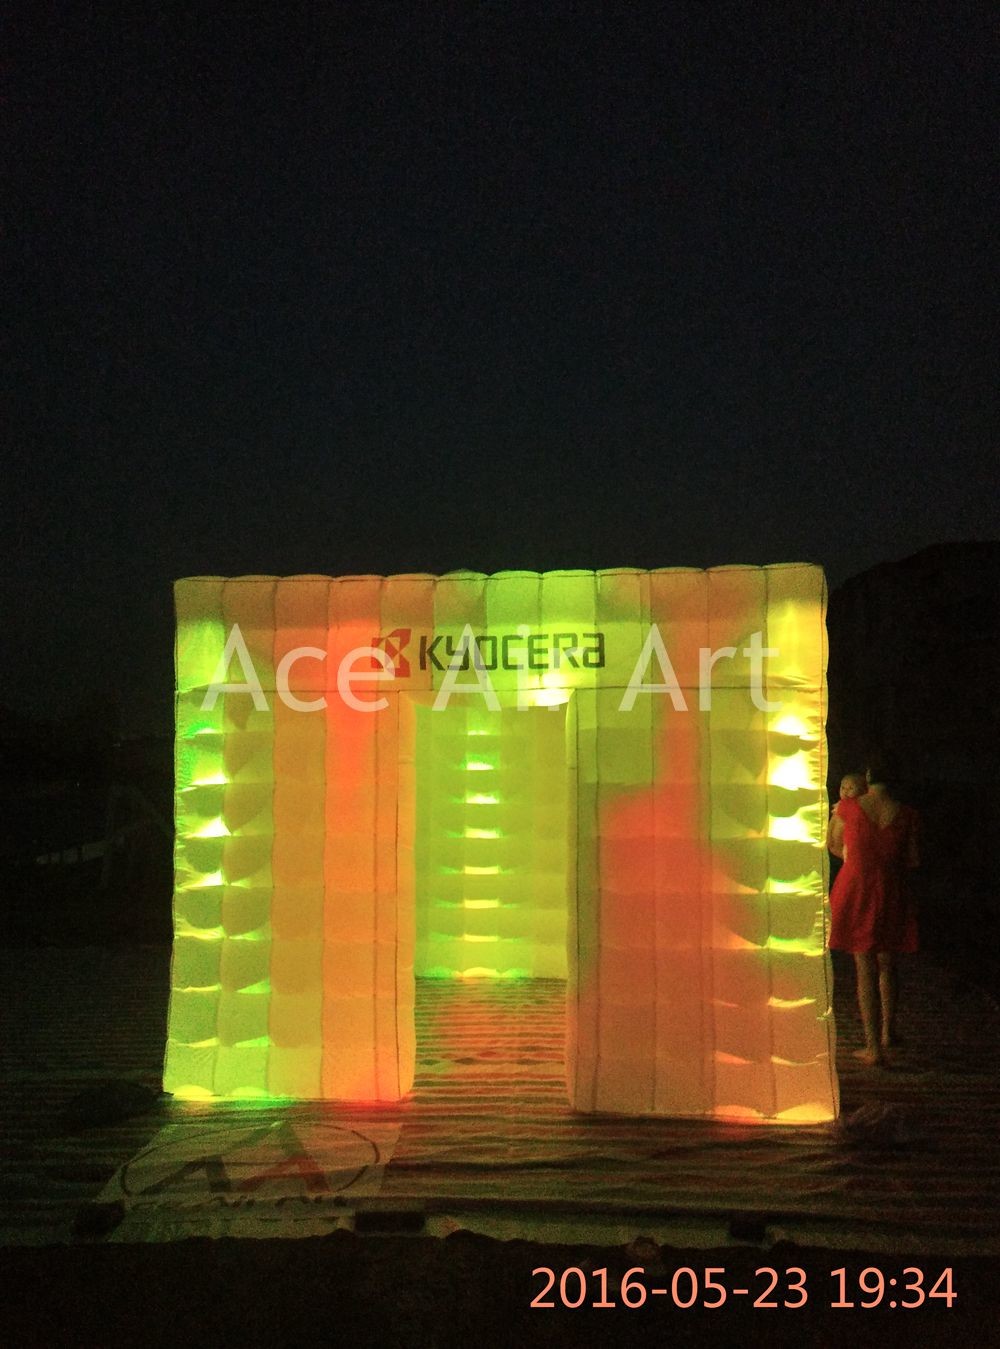  oxford fabricbigger size 3mL x3mW x2.4m H led lighting inflatable photo booth for rental Manufactures